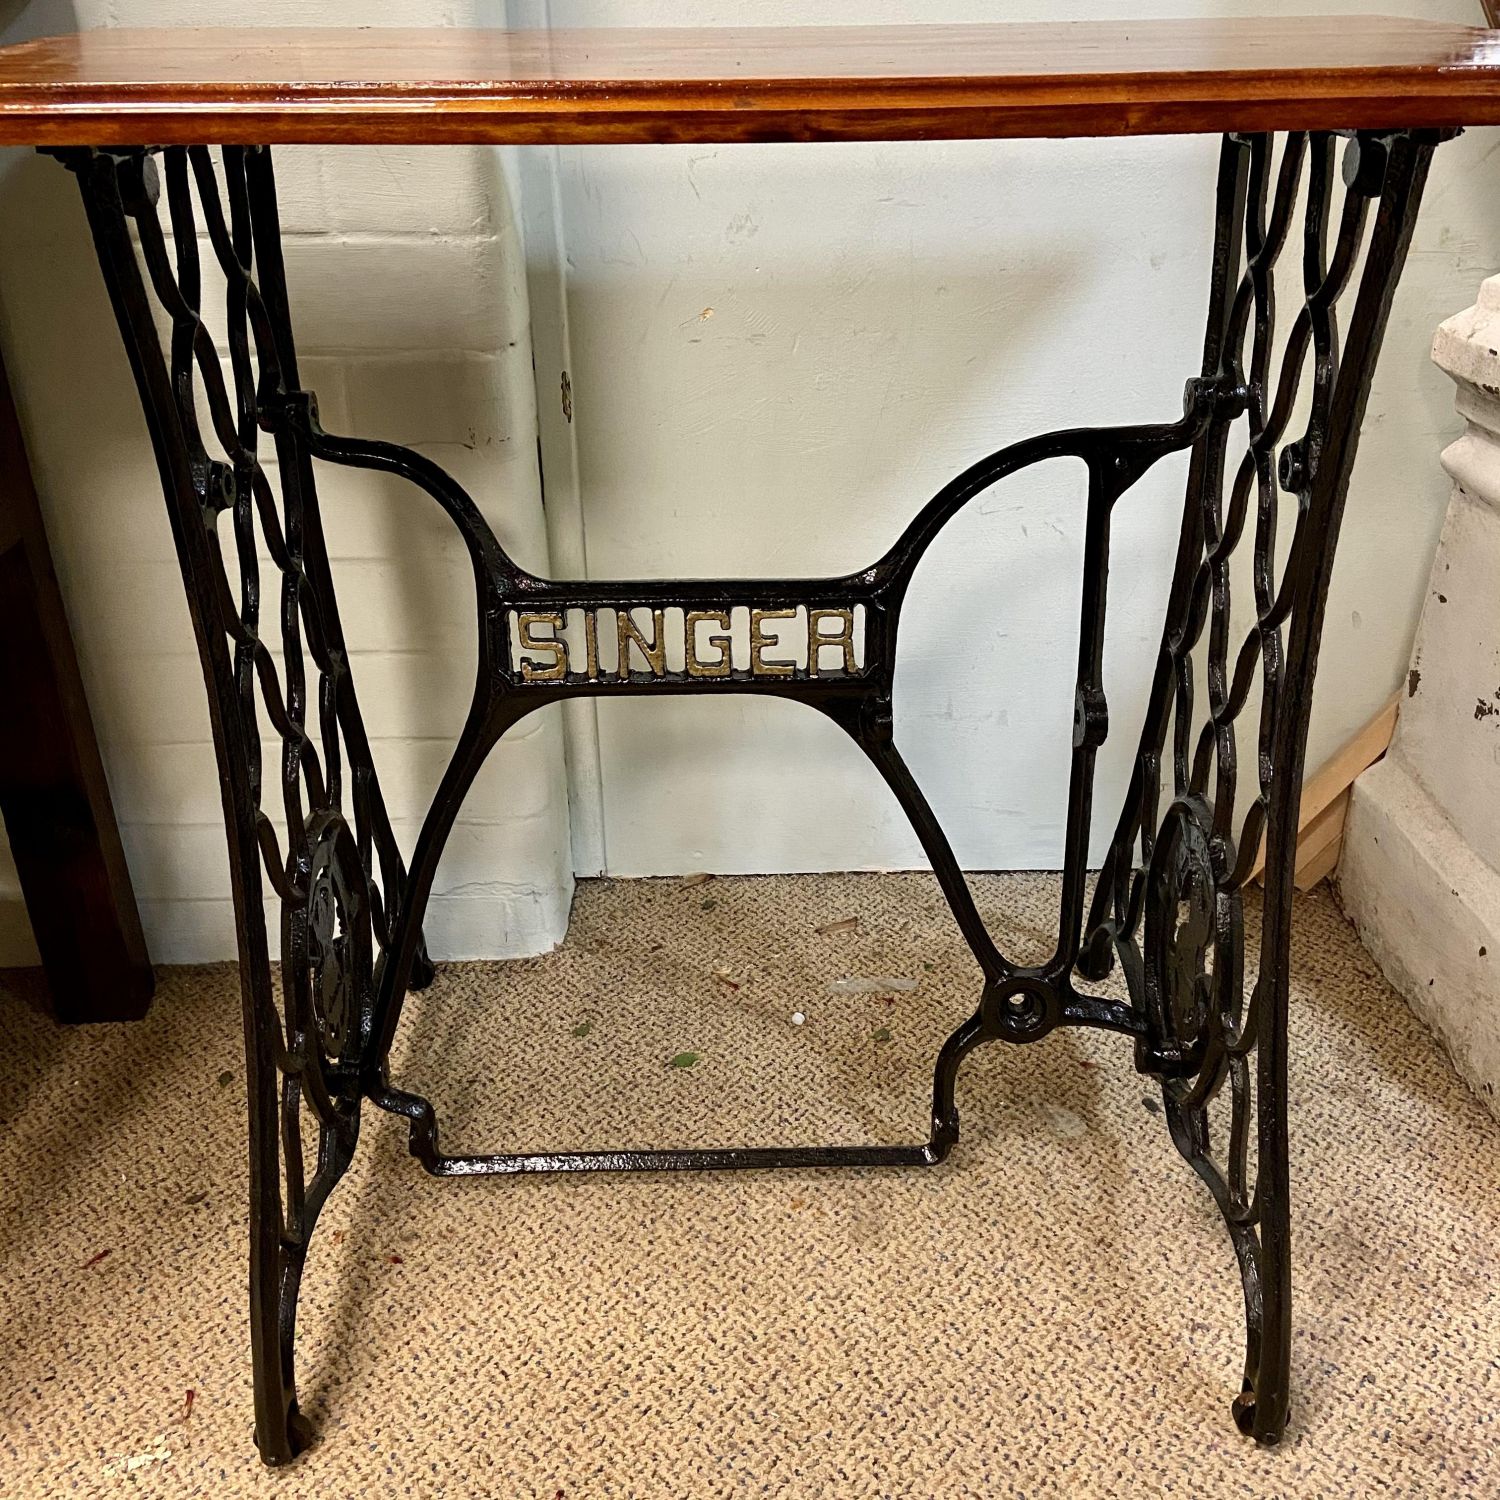 Vintage Singer Sewing Machine Stand Antique Tables Hemswell